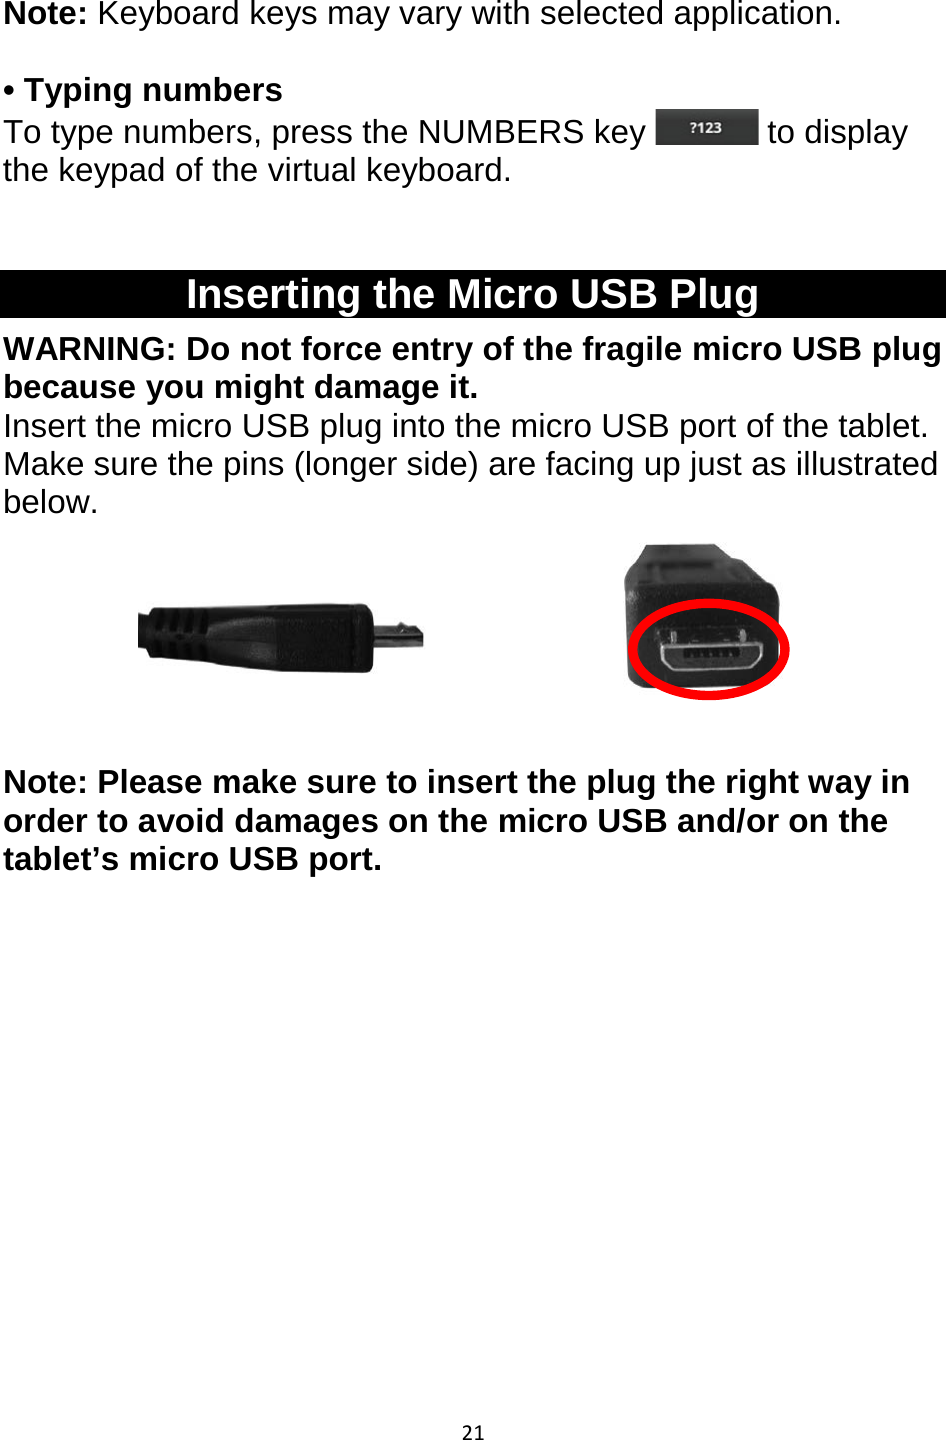 21  Note: Keyboard keys may vary with selected application.   • Typing numbers To type numbers, press the NUMBERS key   to display the keypad of the virtual keyboard.  Inserting the Micro USB Plug WARNING: Do not force entry of the fragile micro USB plug because you might damage it.  Insert the micro USB plug into the micro USB port of the tablet. Make sure the pins (longer side) are facing up just as illustrated below.        Note: Please make sure to insert the plug the right way in order to avoid damages on the micro USB and/or on the tablet’s micro USB port.          